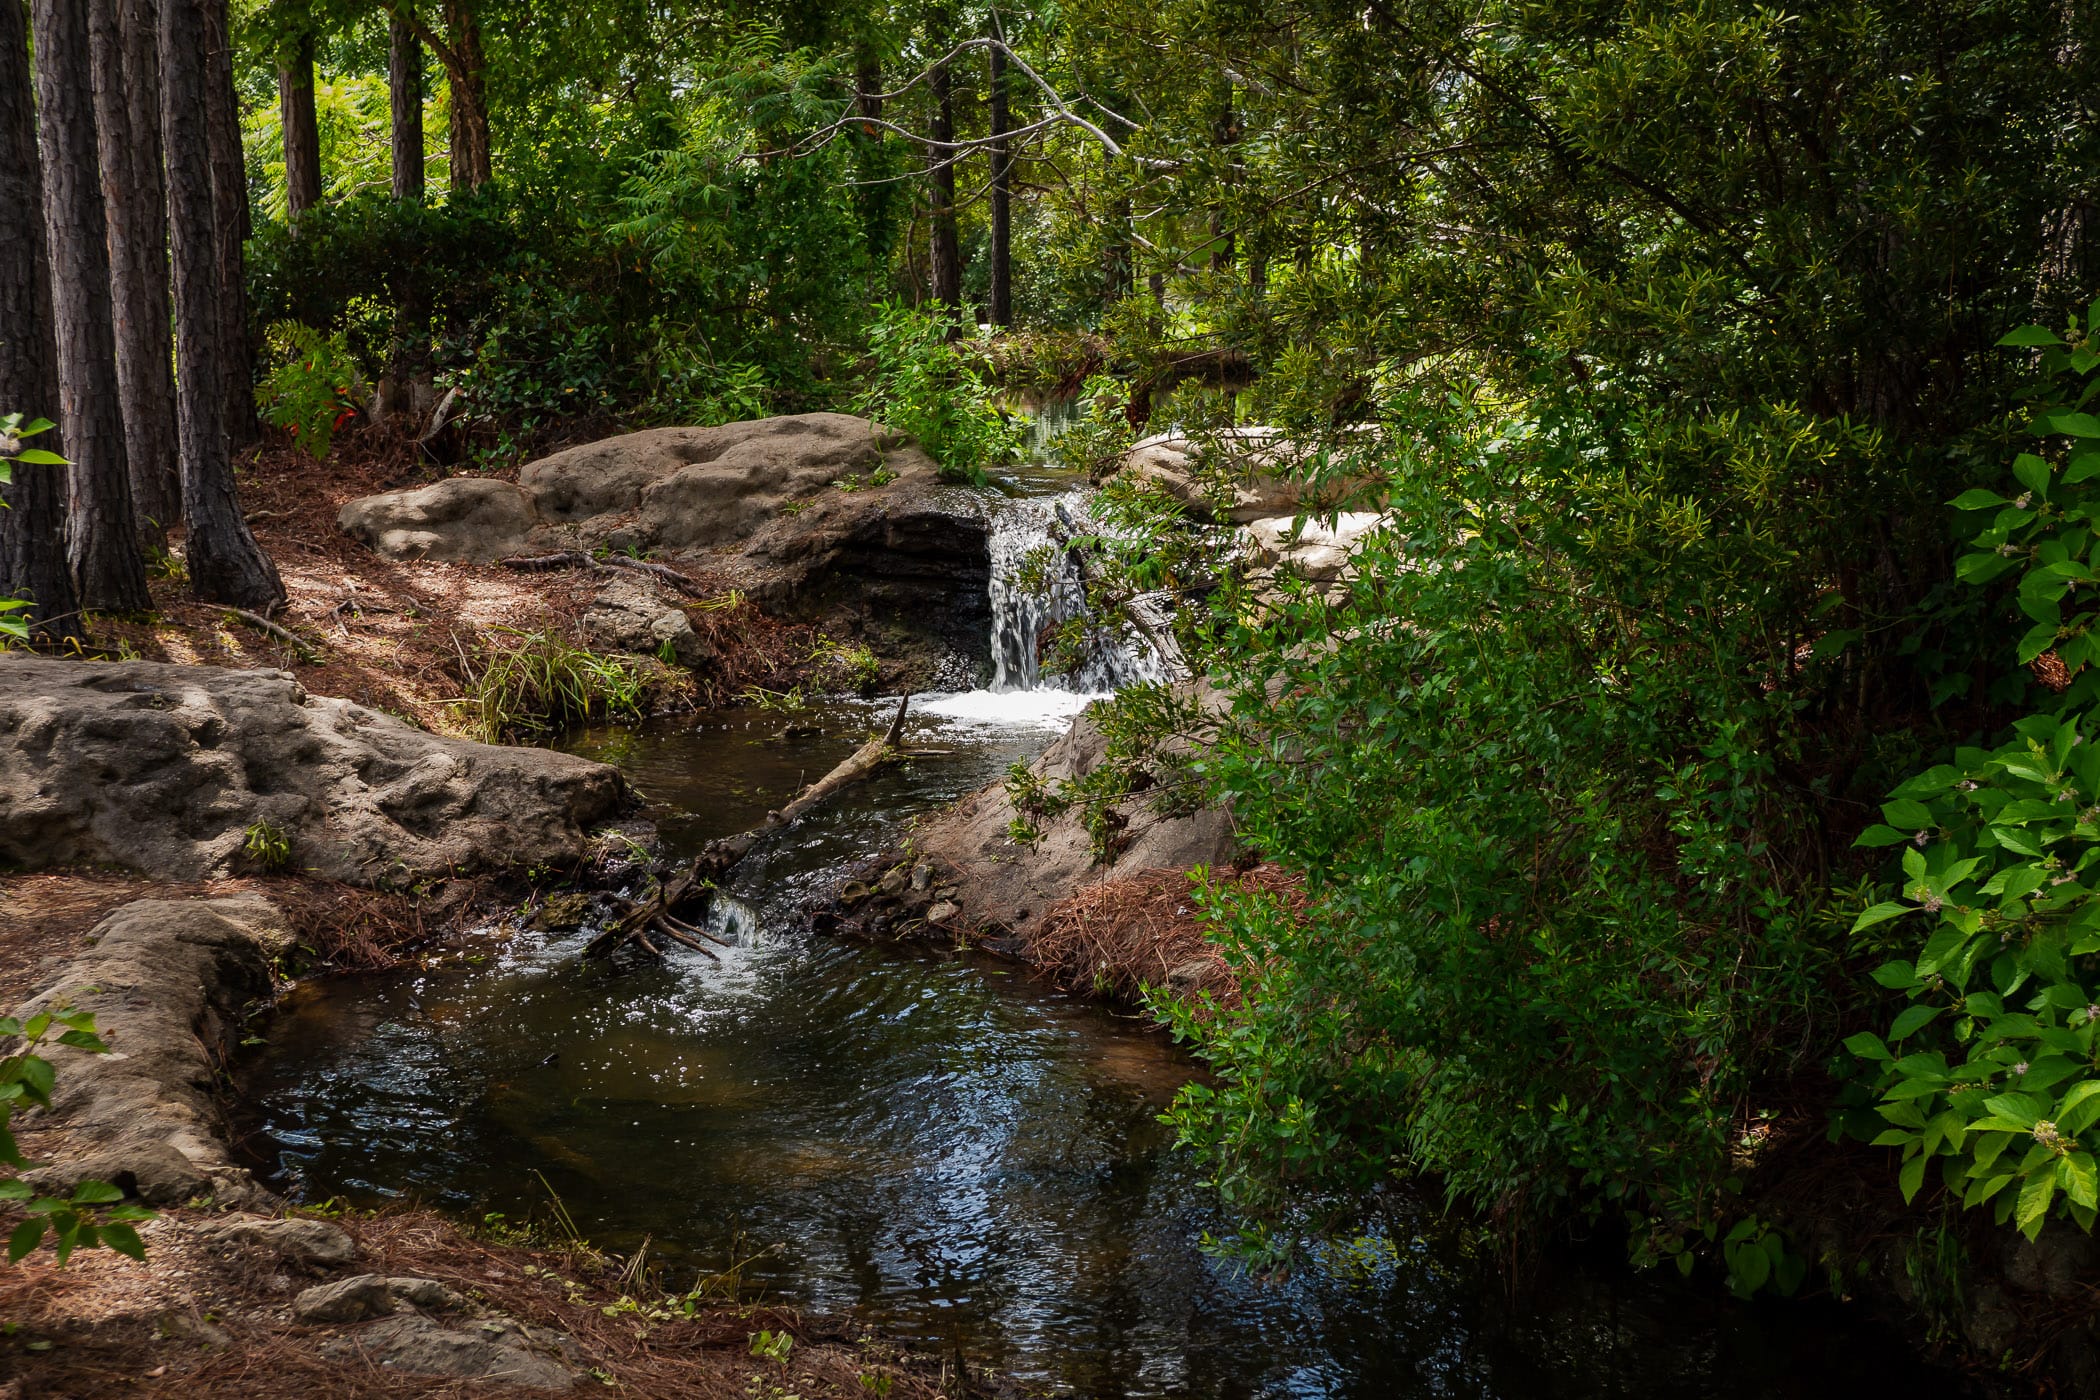 A small brook flows through the East Texas forest near Athens.